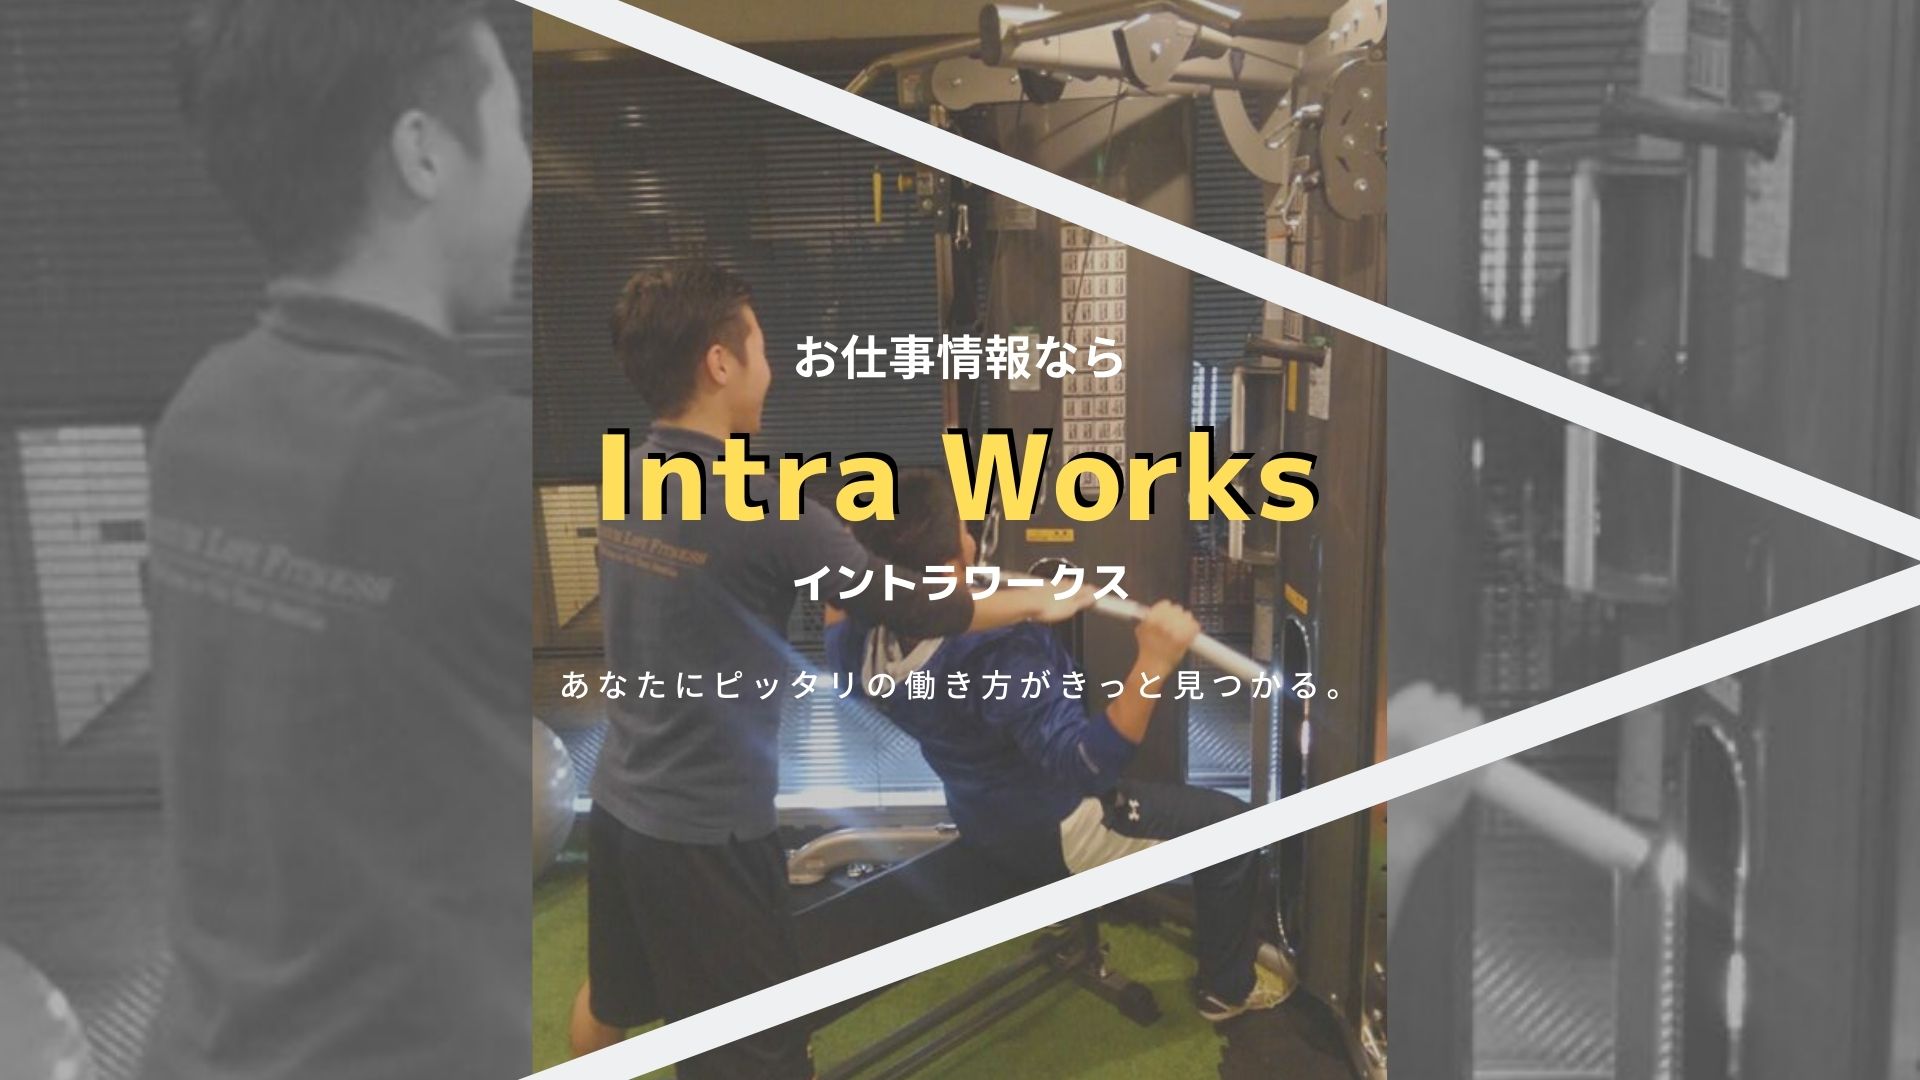 Intra Works